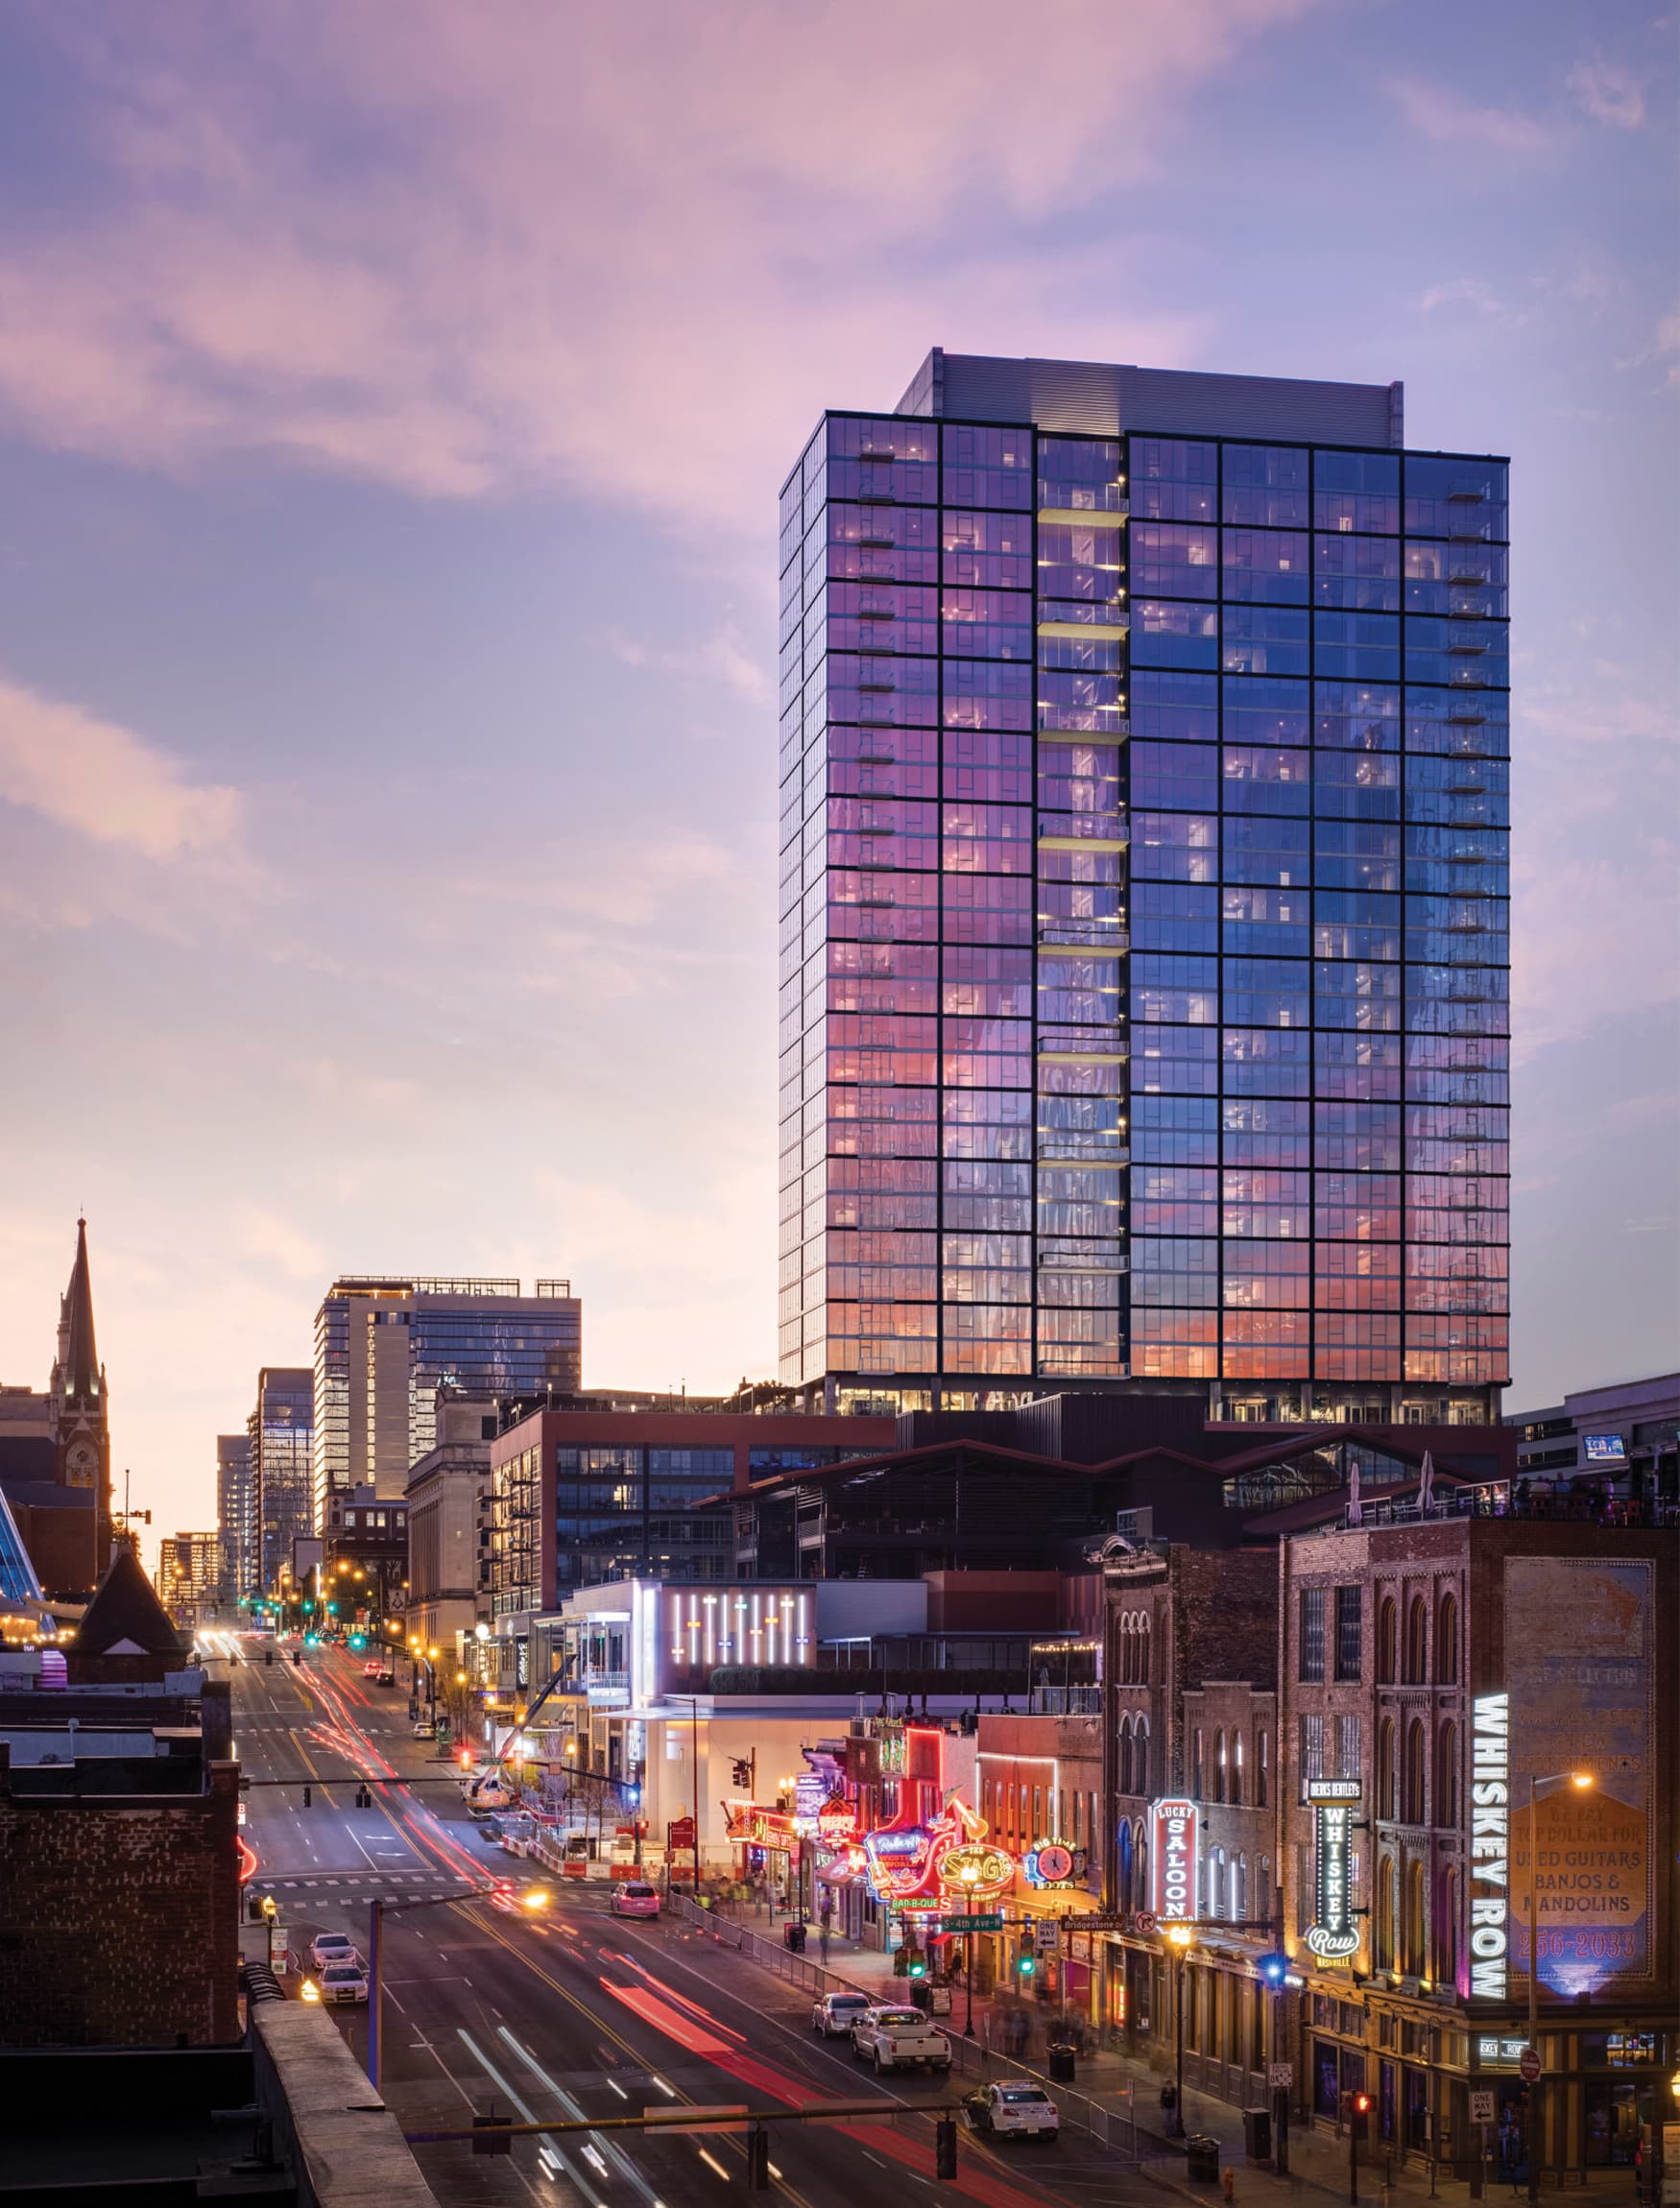 Image overlooking Fifth + Broadway at sunset. Signage and wayfinding for Fifth + Broadway in Nashville, Tennessee by RSM Design